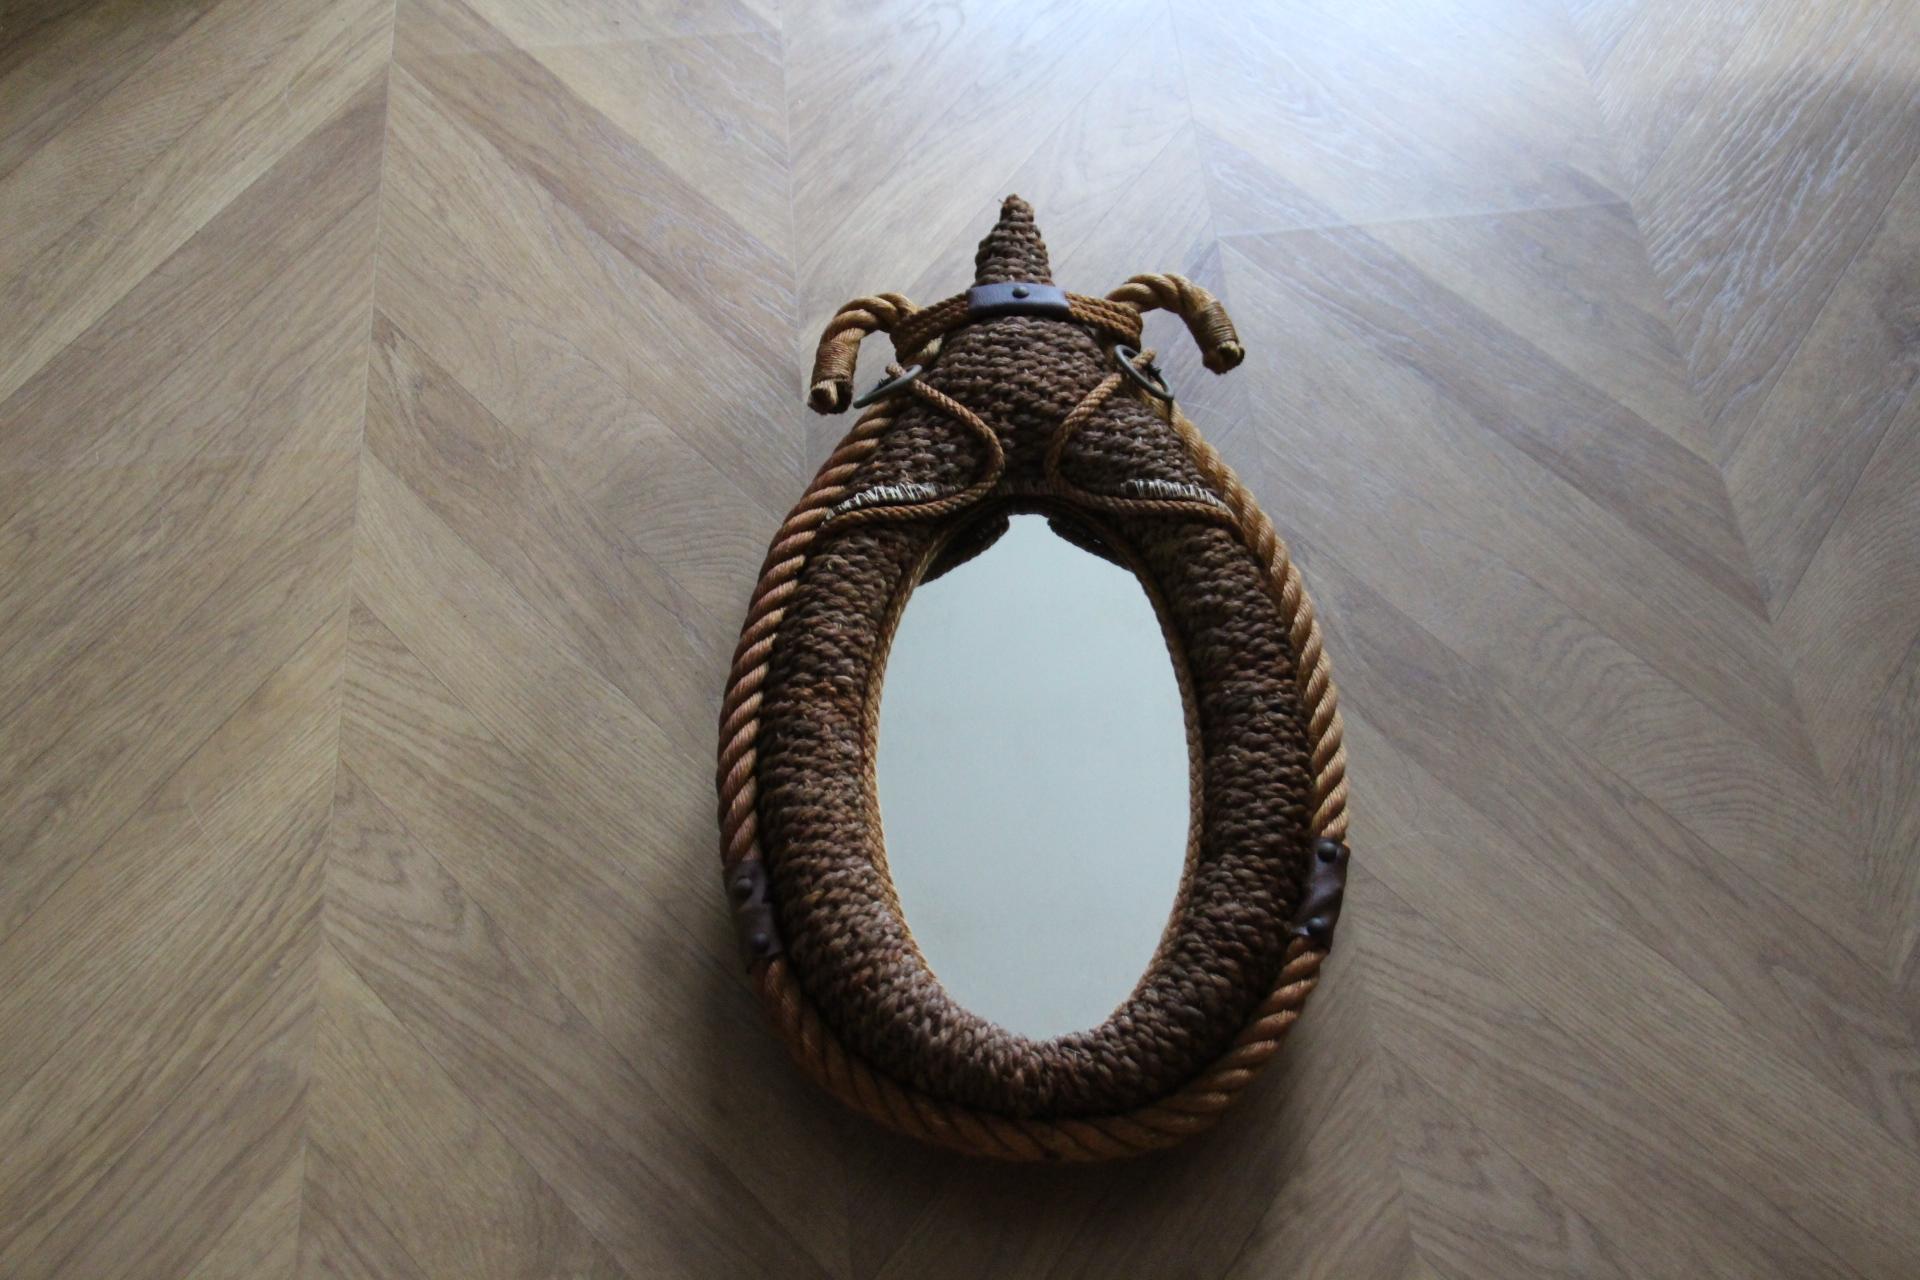 Vintage 1950s Rope Mirror by Adrien Audoux and Frida Minet For Sale 2